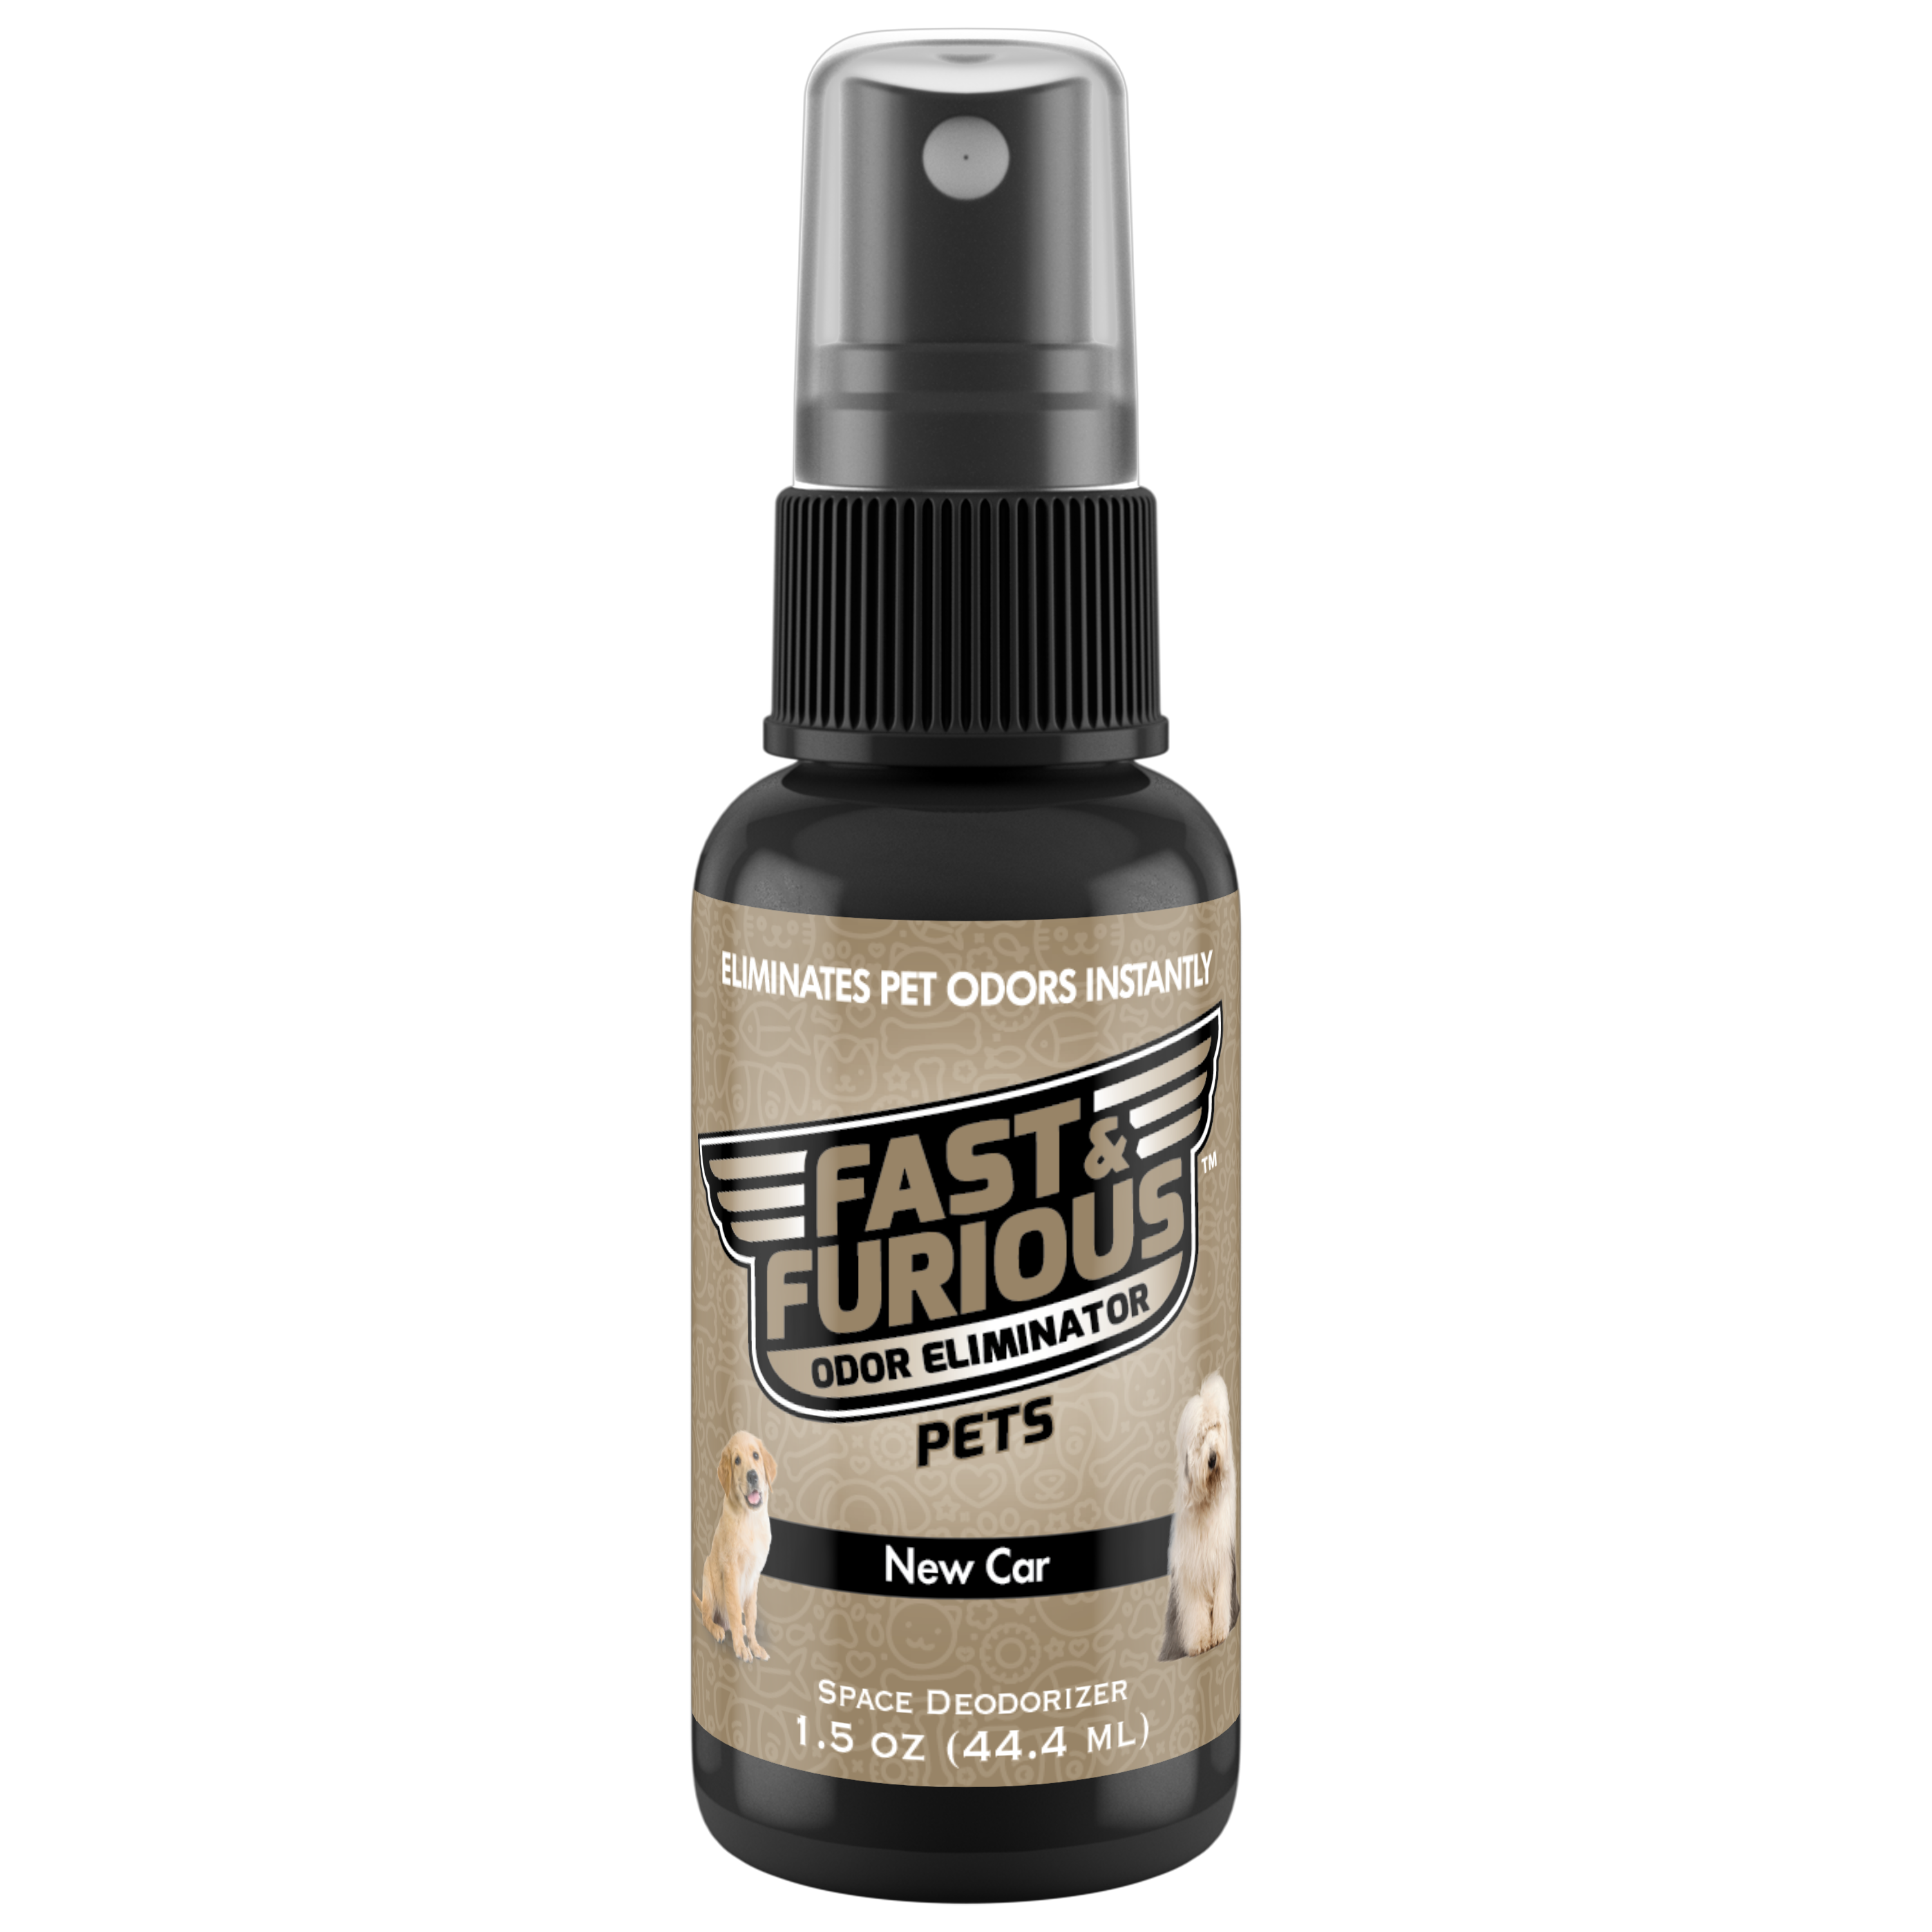 Fast and Furious Pets Odor Eliminator - New Car Scent